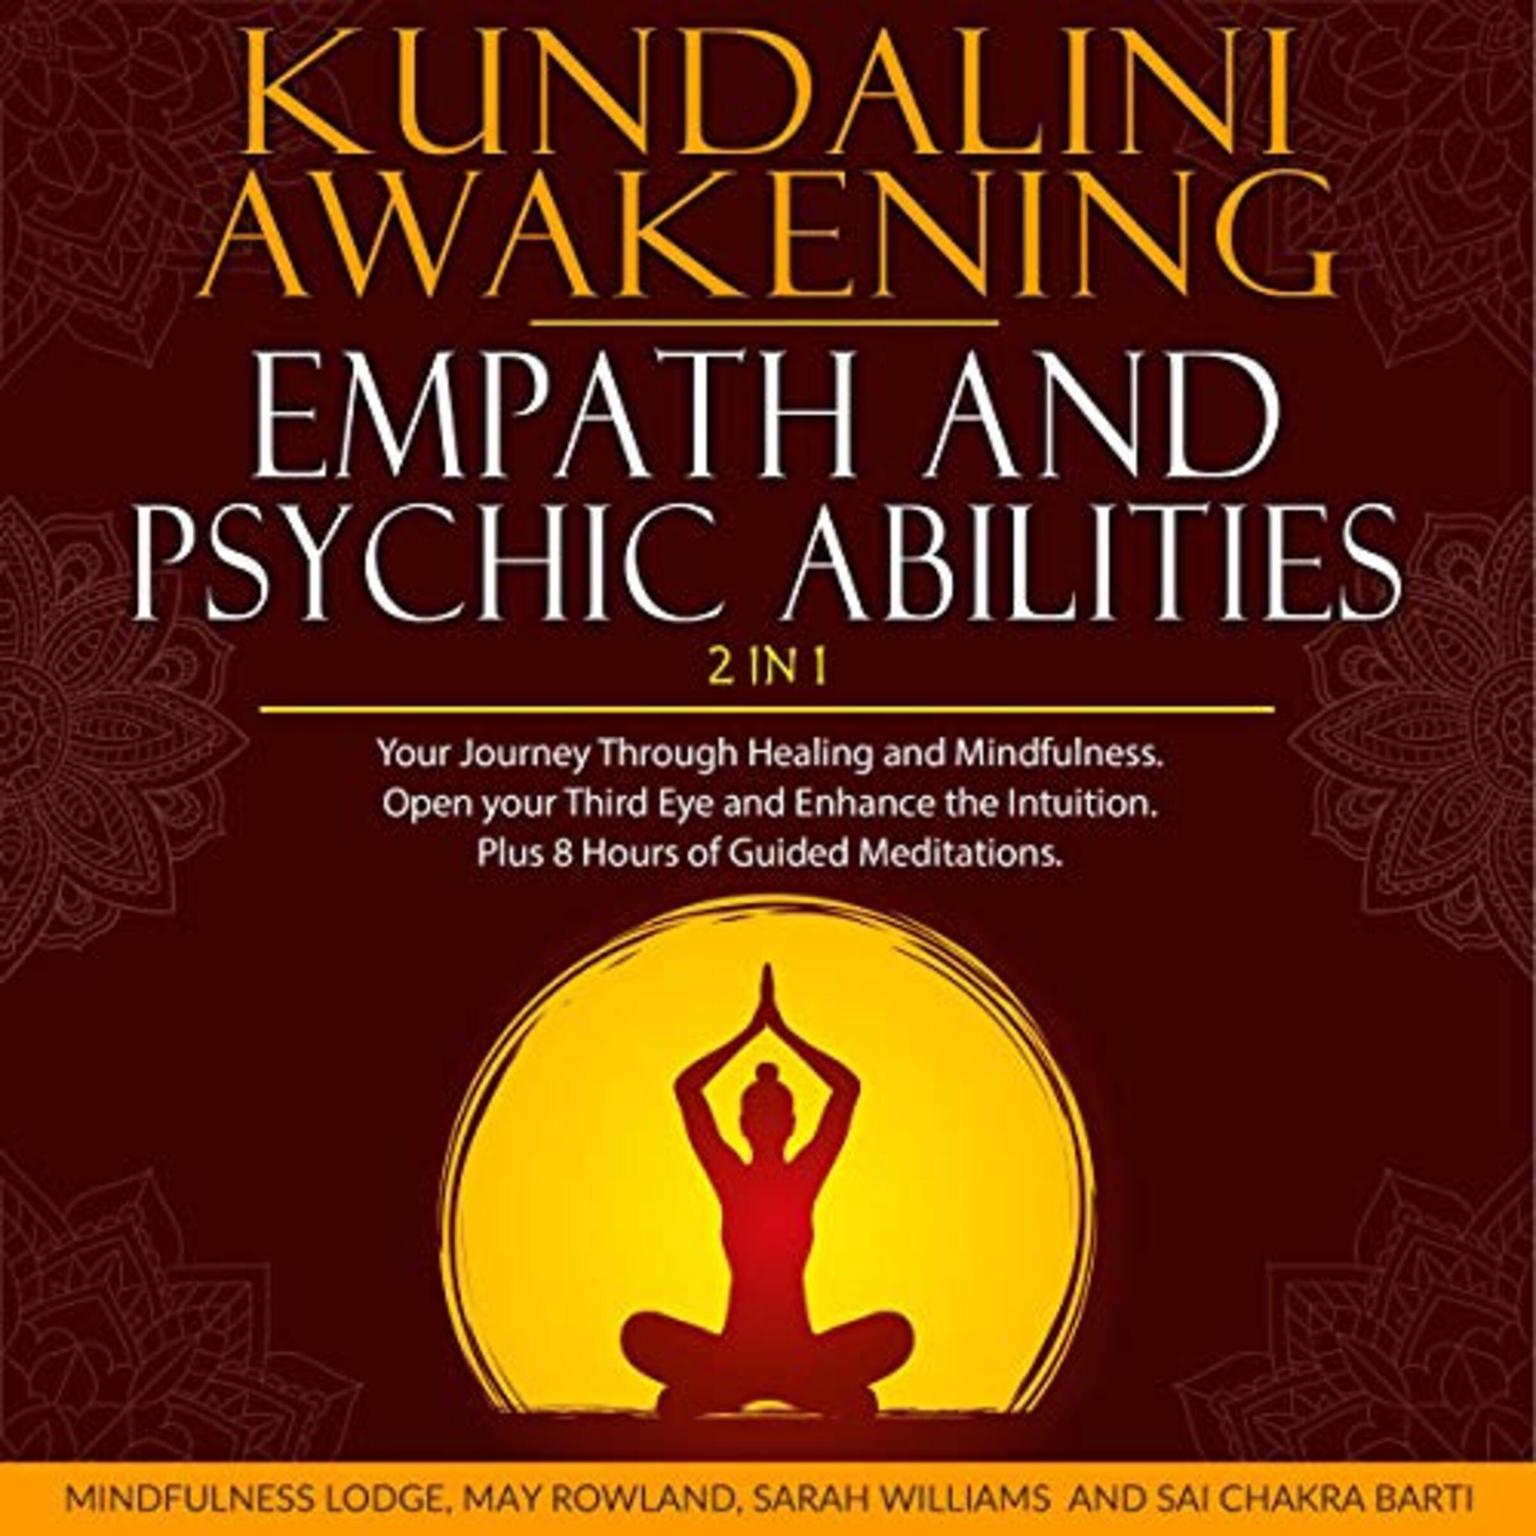 Kundalini Awakening, Empath and Psychic Abilities 2 in 1: Your Journey through Healing and Mindfulness. Open Your Third Eye and Enhance the Intuition. Plus 8 Hours of Guided Meditations Audiobook, by May Rowland